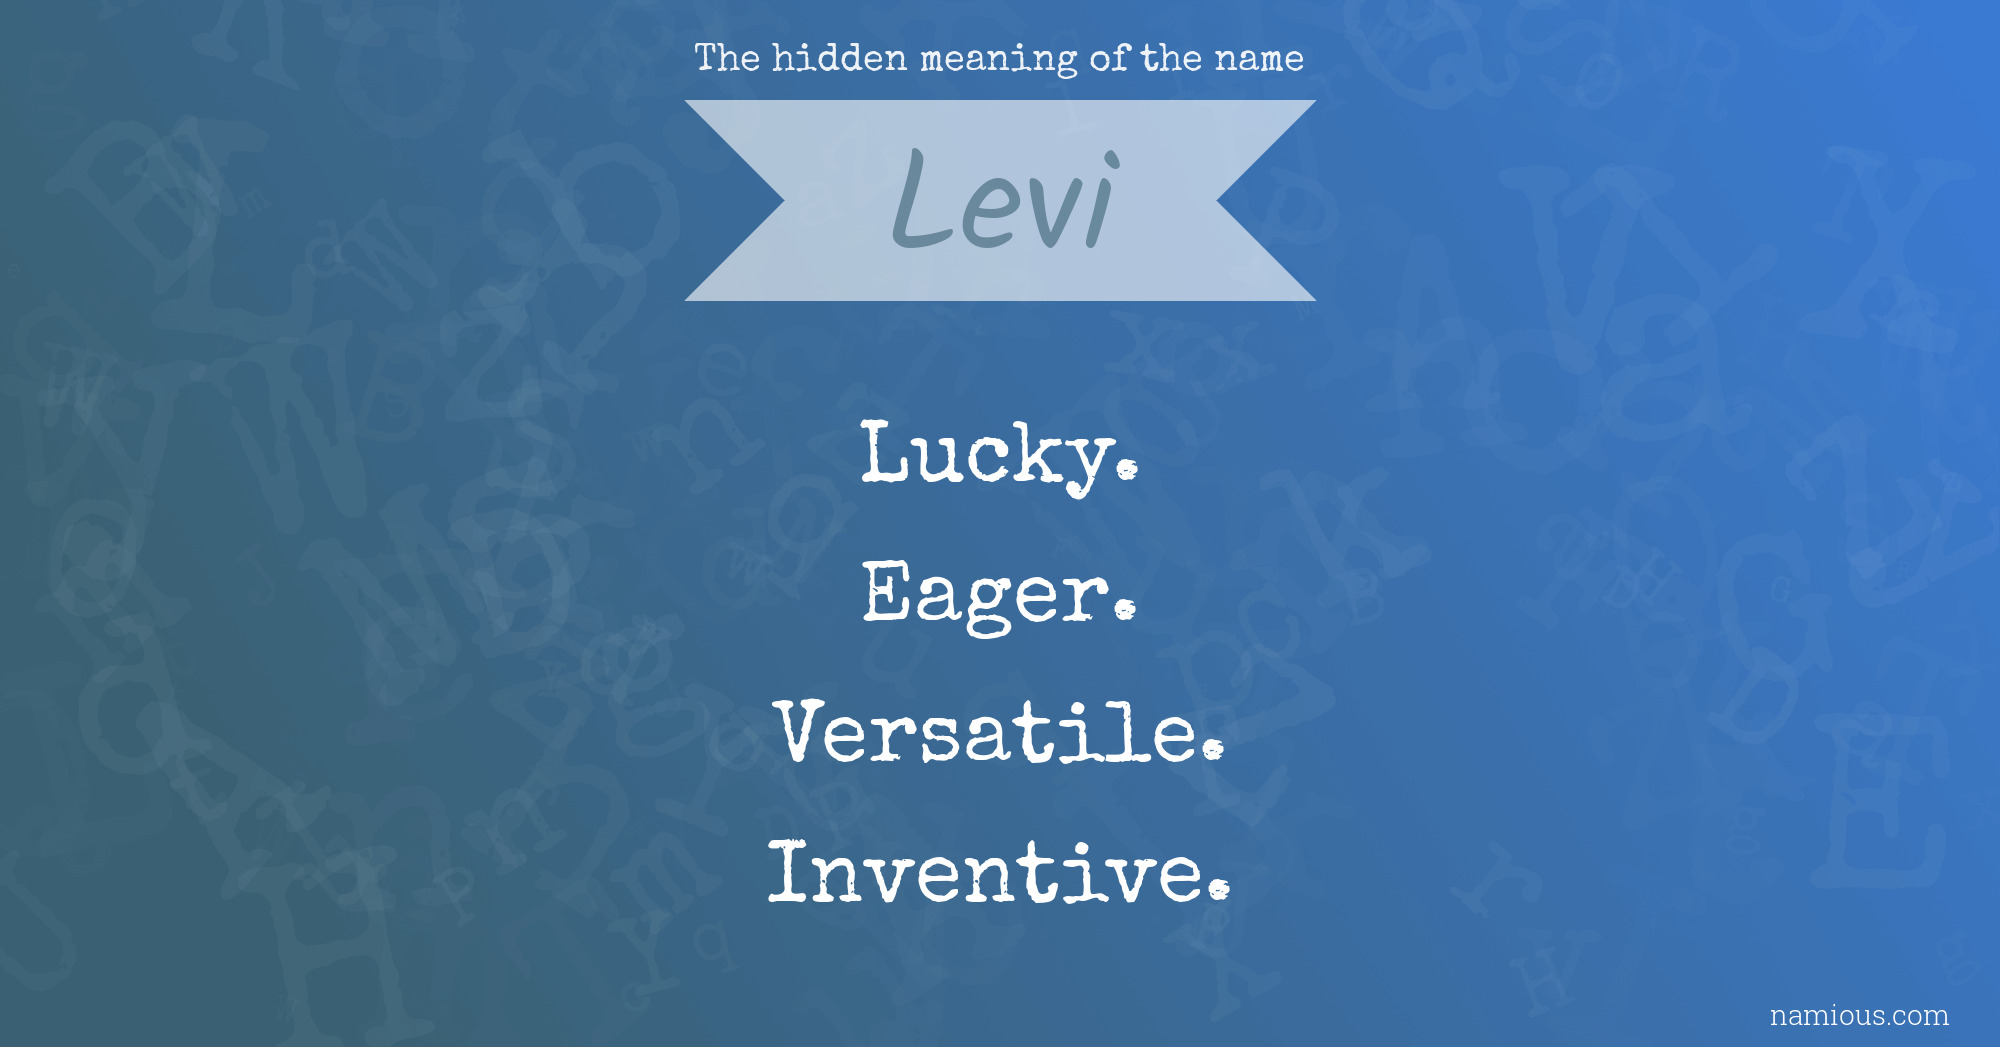 ejendom marts pen The hidden meaning of the name Levi | Namious